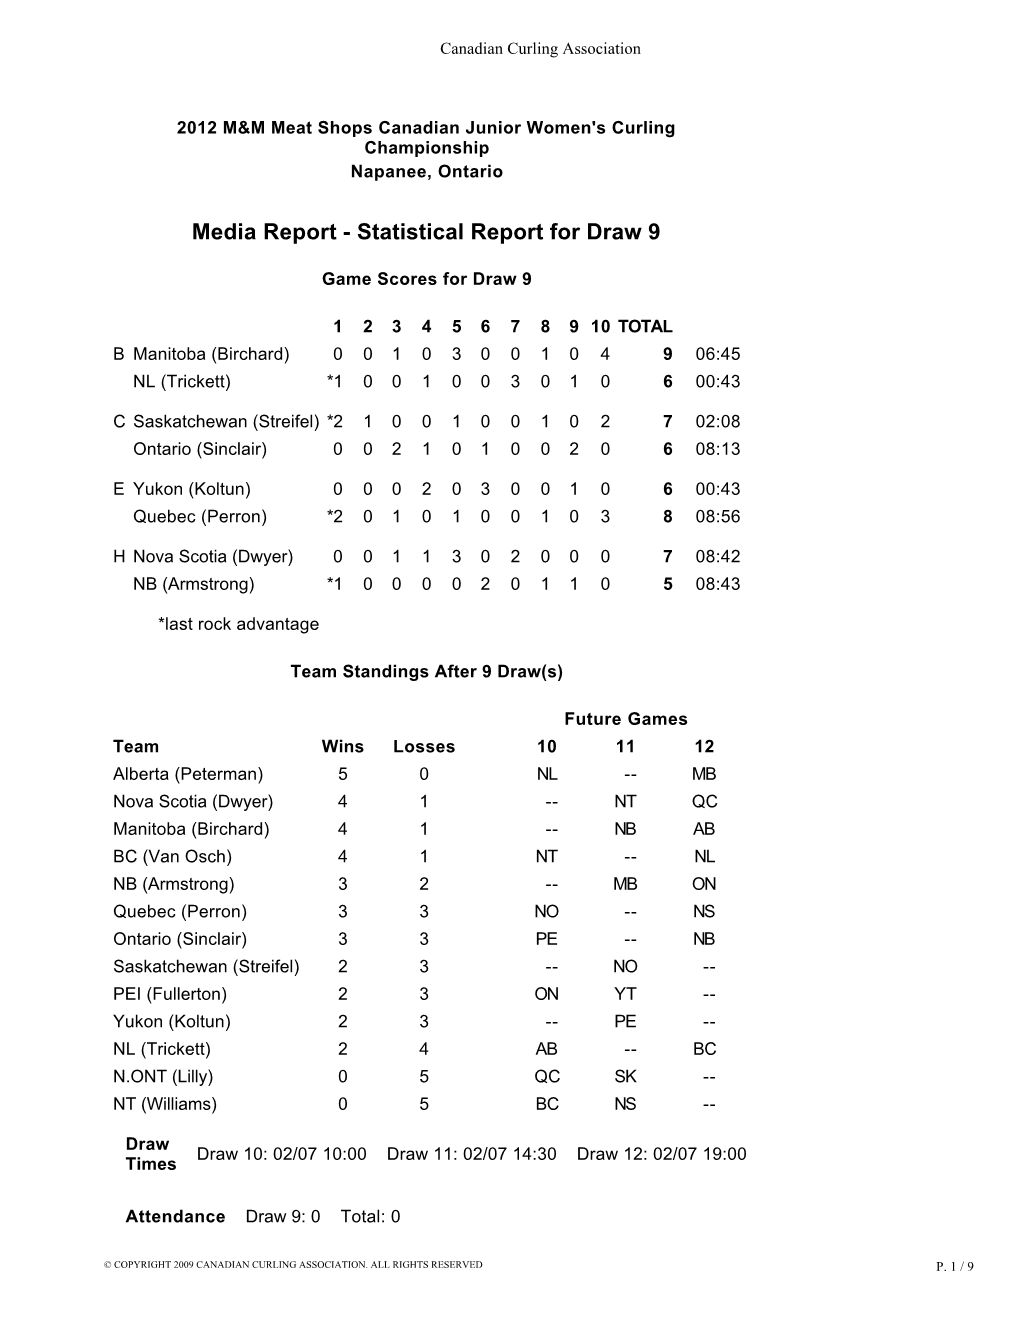 Media Report Statistical Report for Draw 9